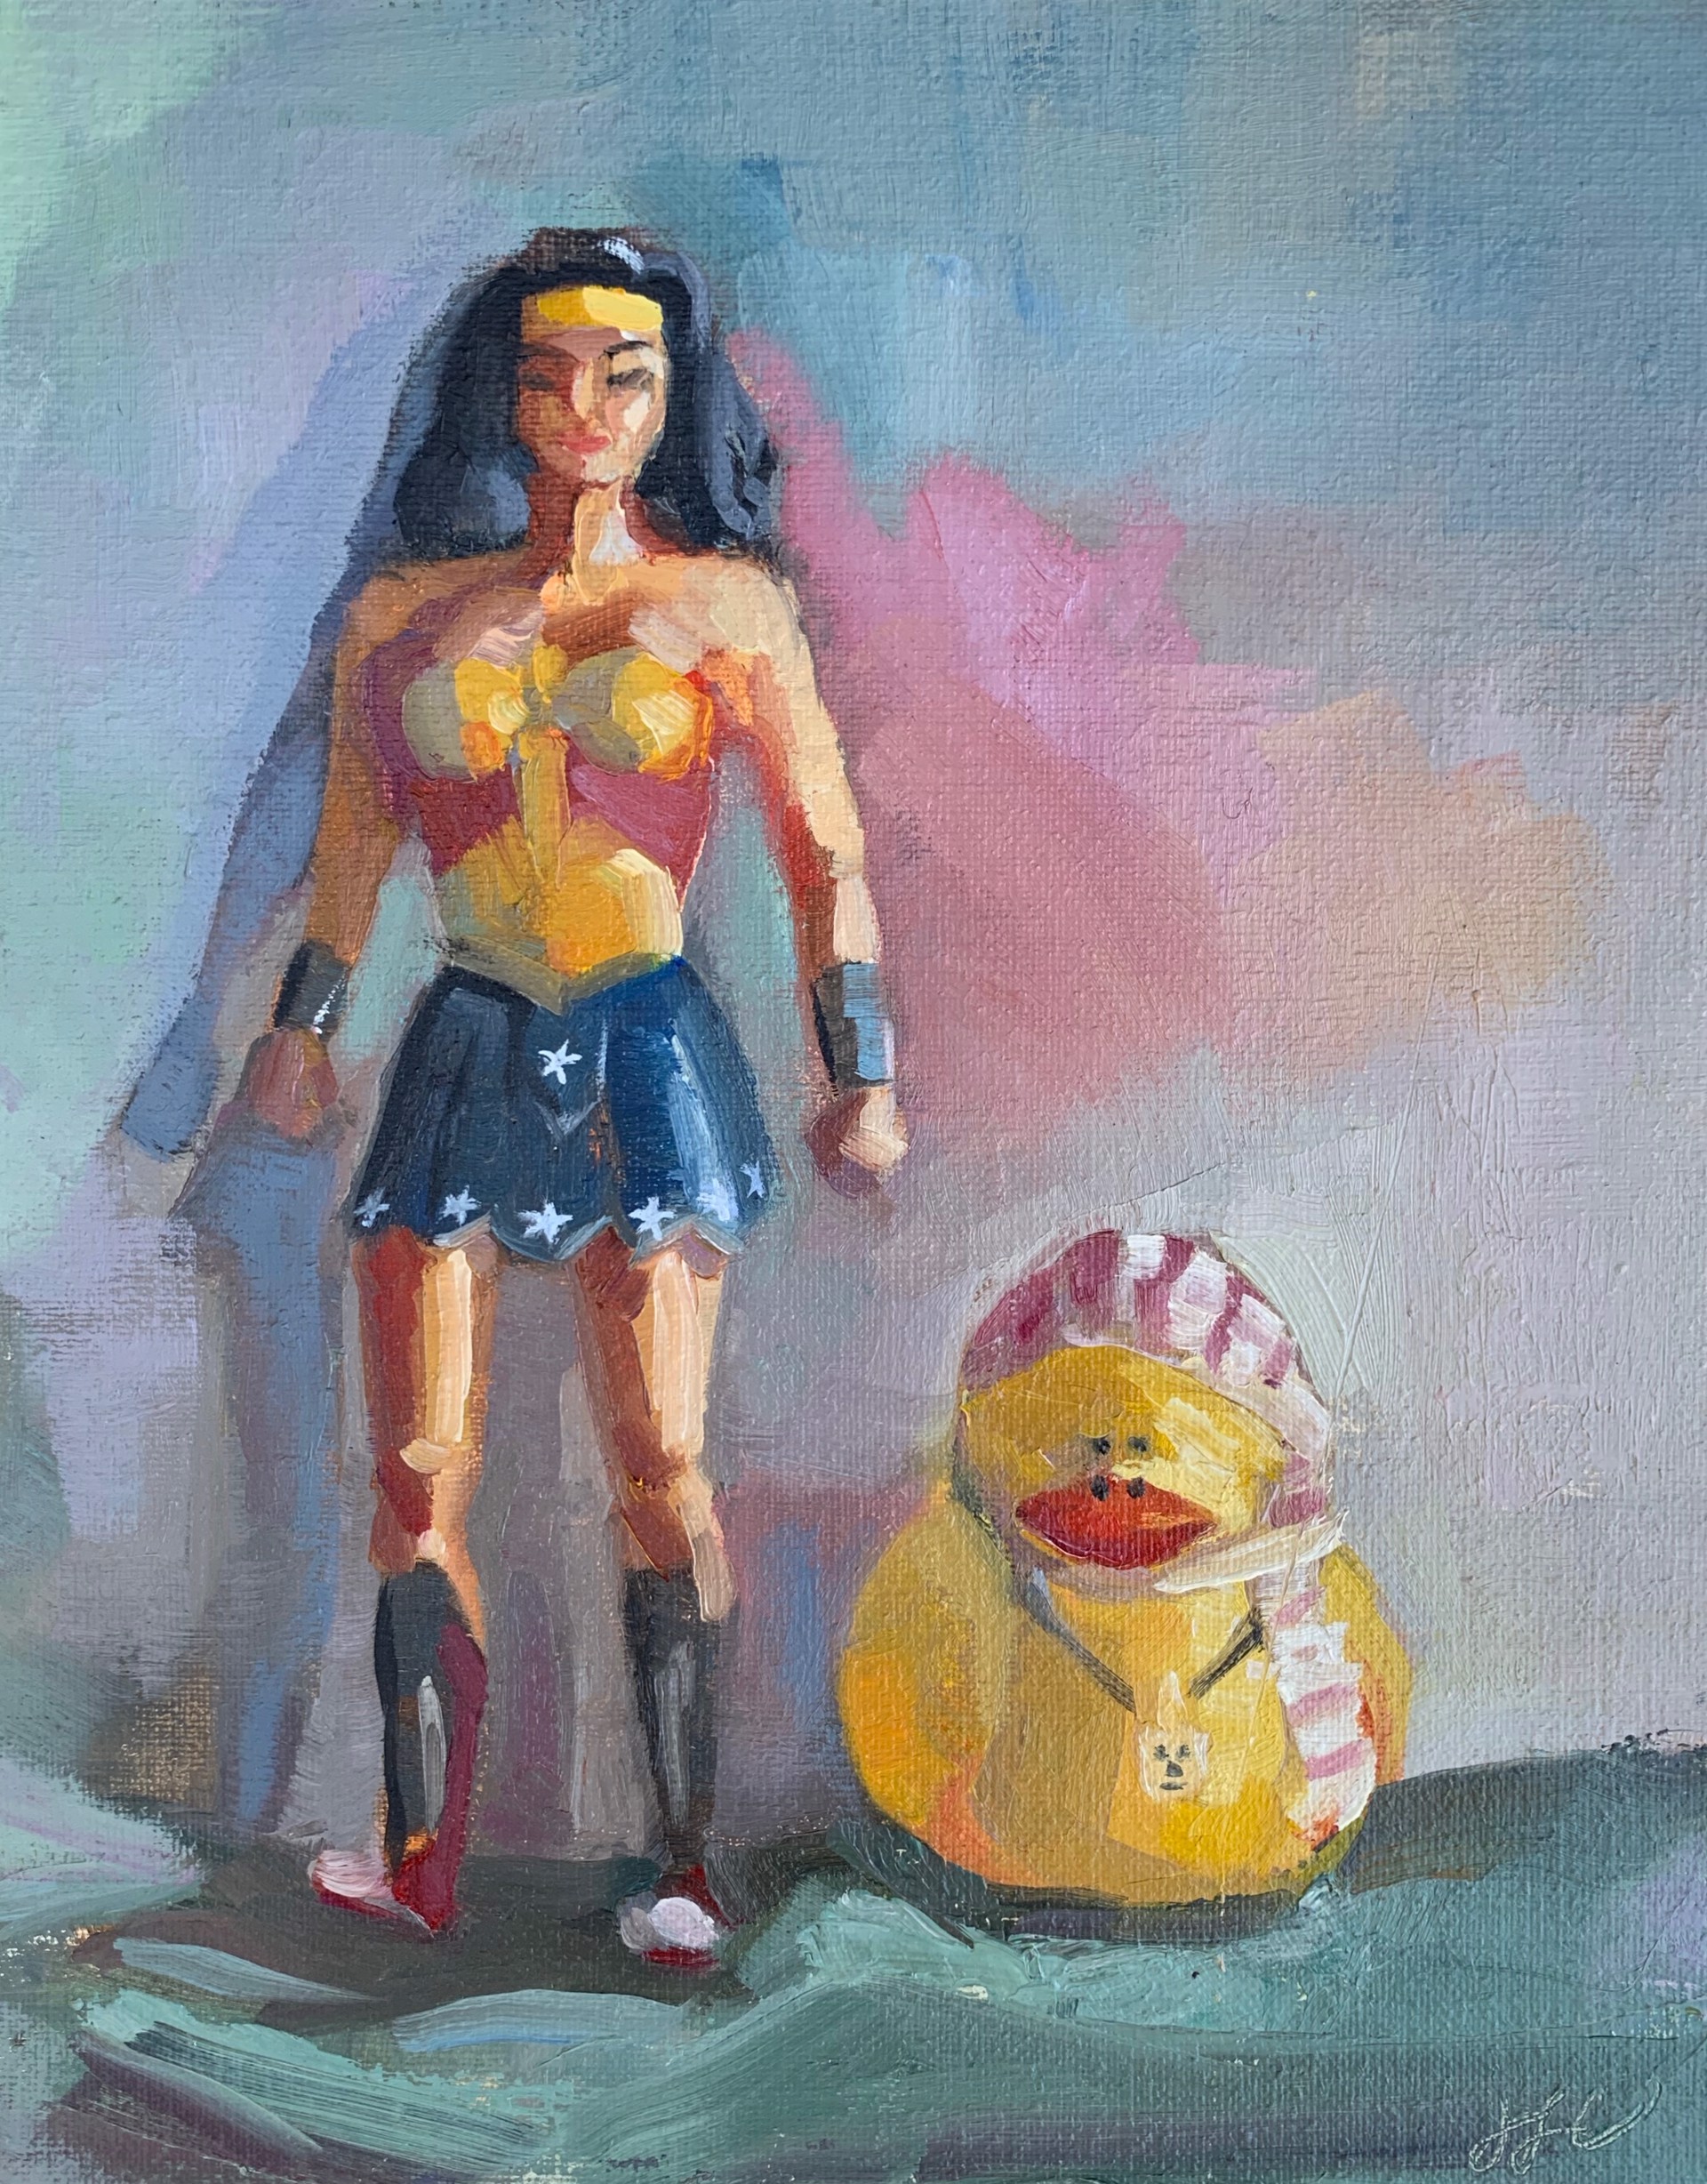 Wonder Woman and Pirate Duck by Jessica Cook